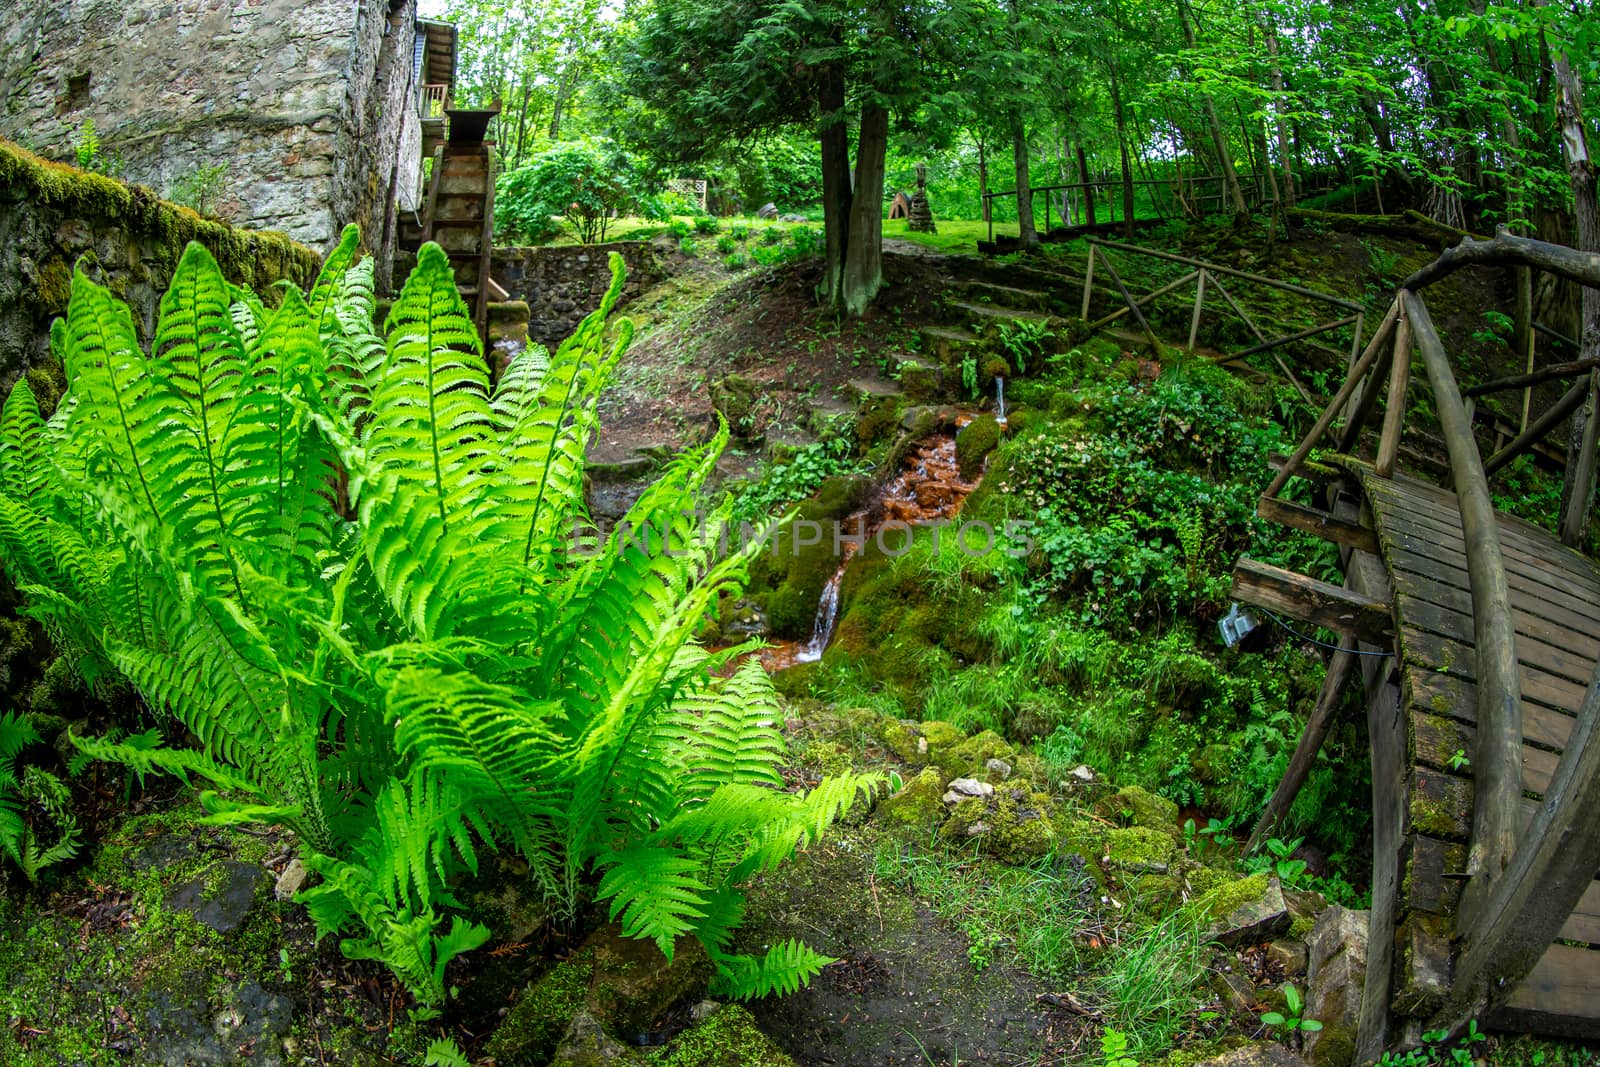 Ferns, stream, wooden bridge and old water mill in the beautiful forest park in Latvia. Shot with fisheye lens. 